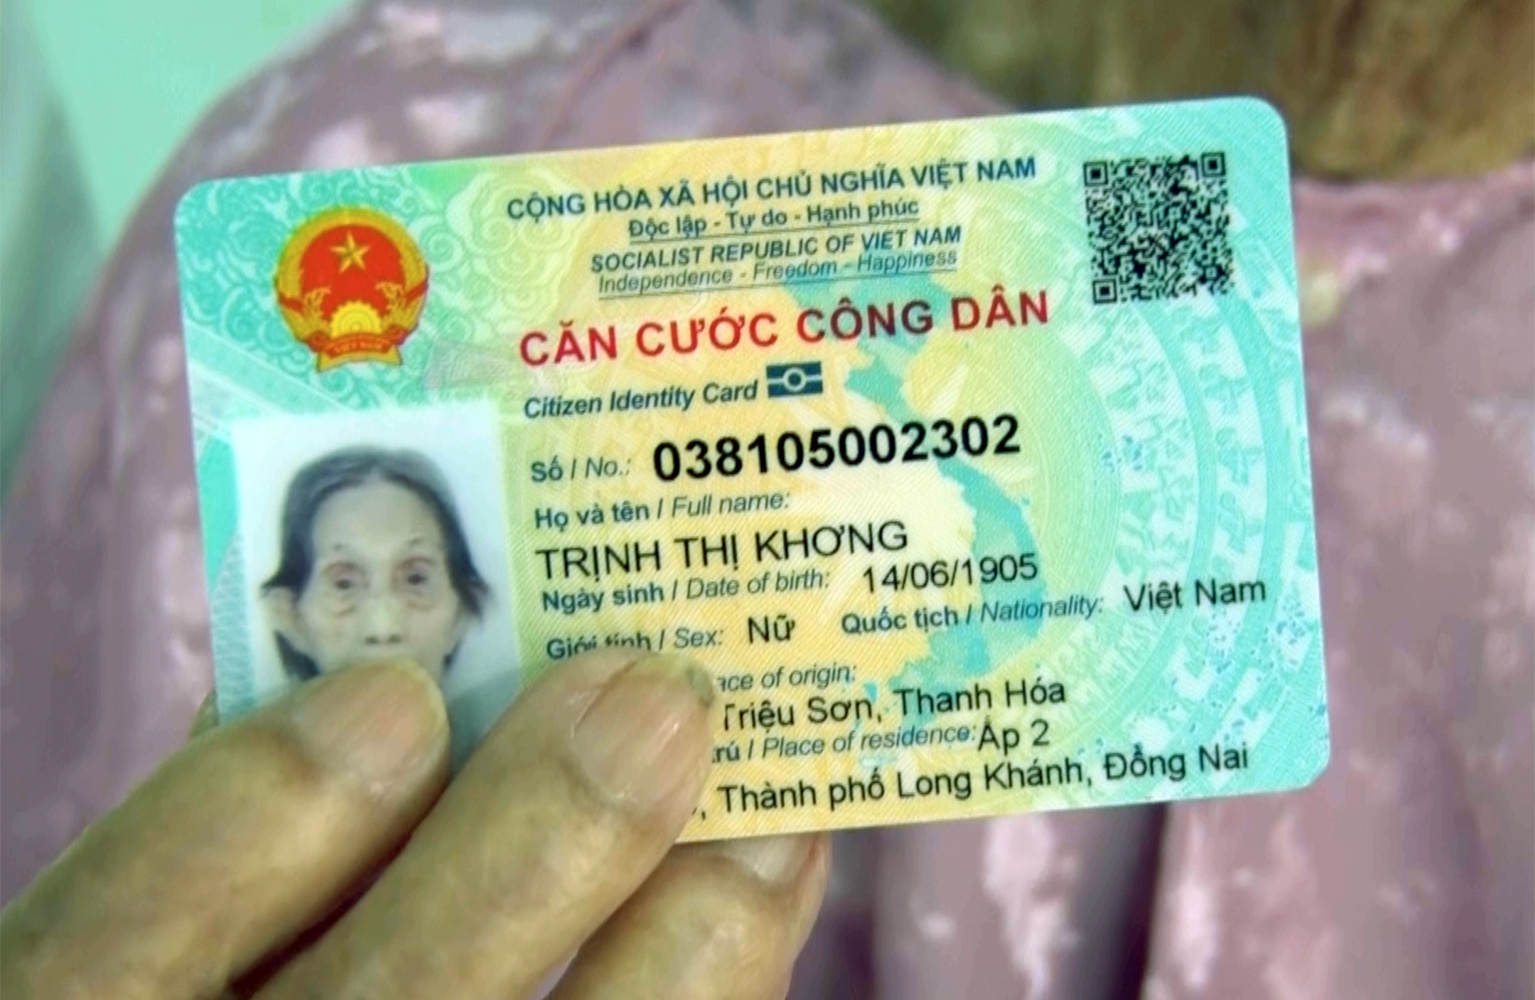 Trinh Thi Khong's citizen identification card indicates her birth year as 1905. Photo: A Loc / Tuoi Tre